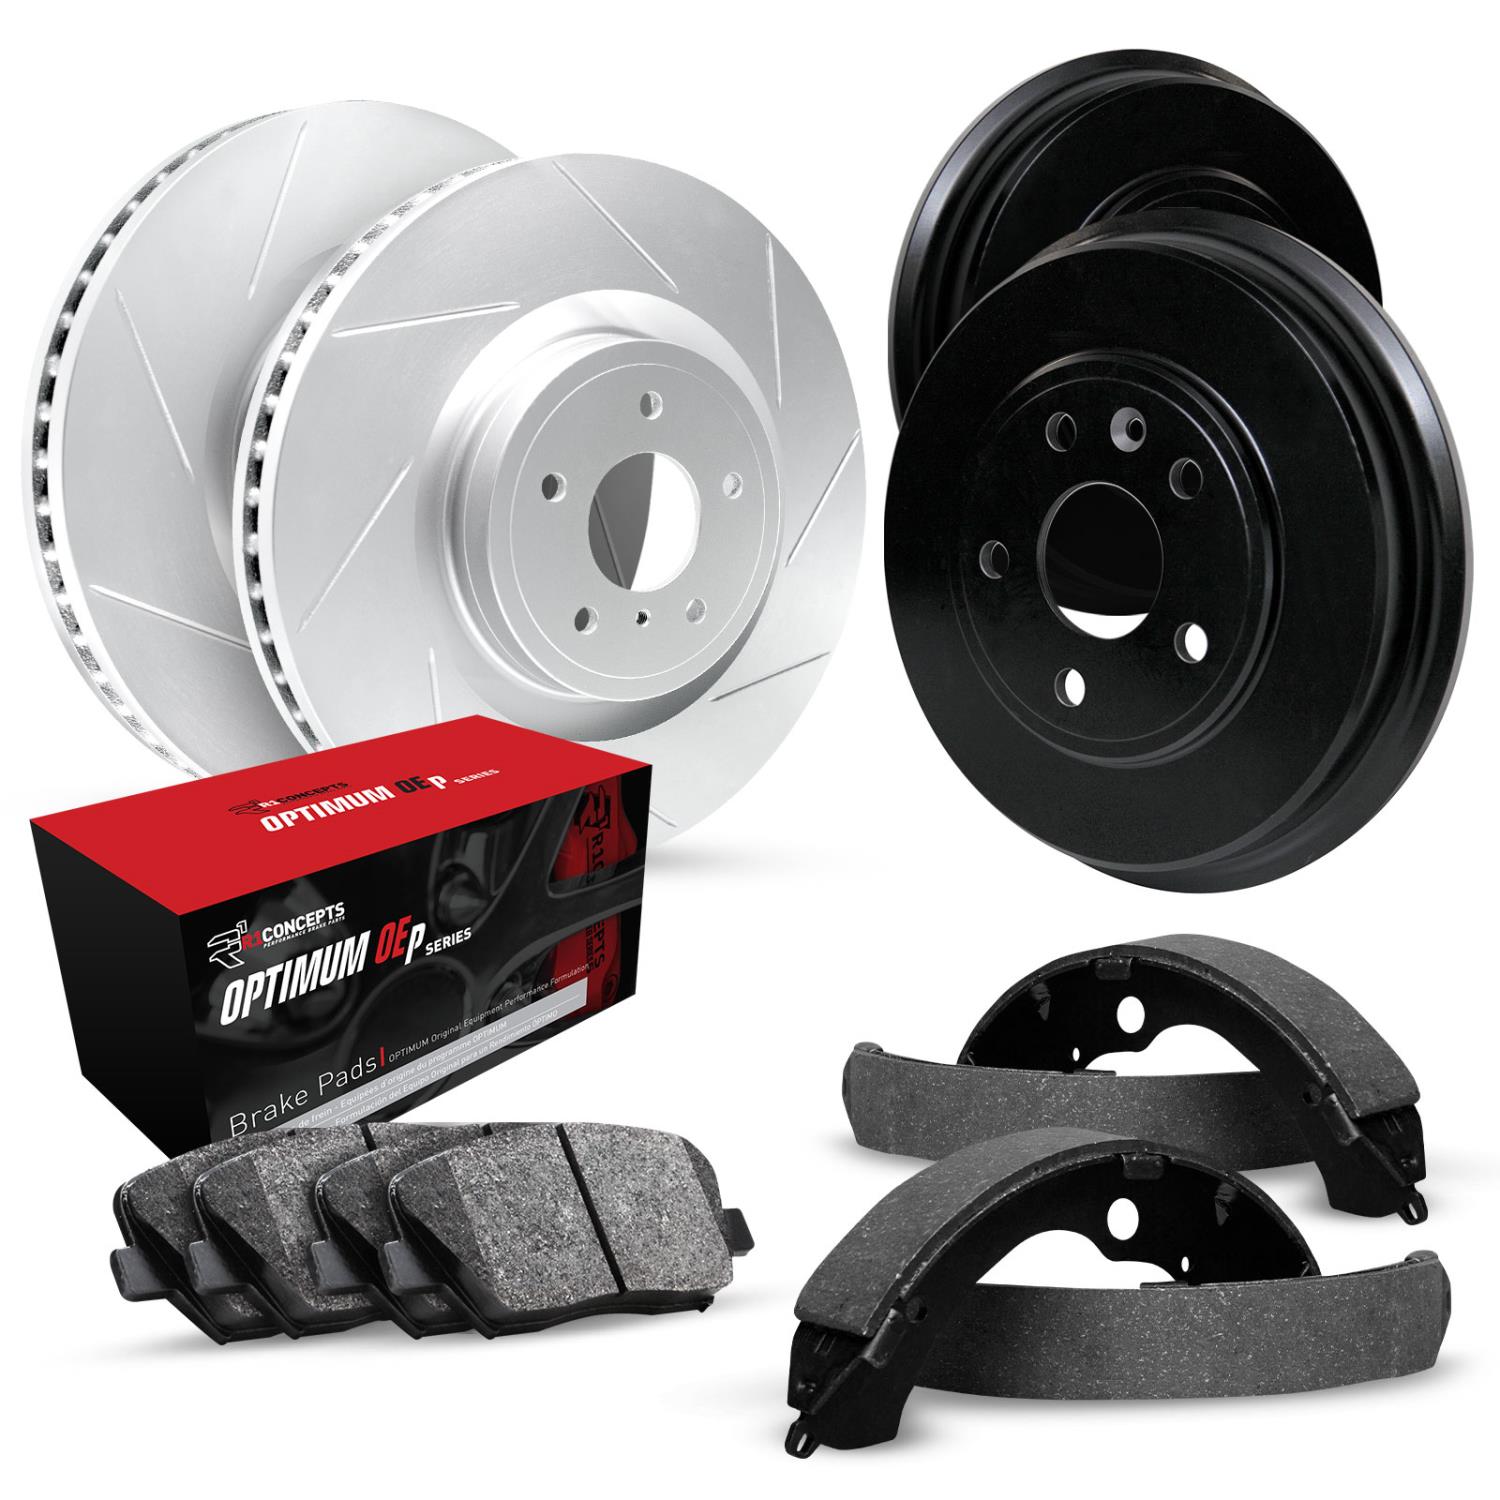 GEO-Carbon Slotted Brake Rotor & Drum Set w/Optimum OE Pads & Shoes, 1992-2002 GM, Position: Front & Rear